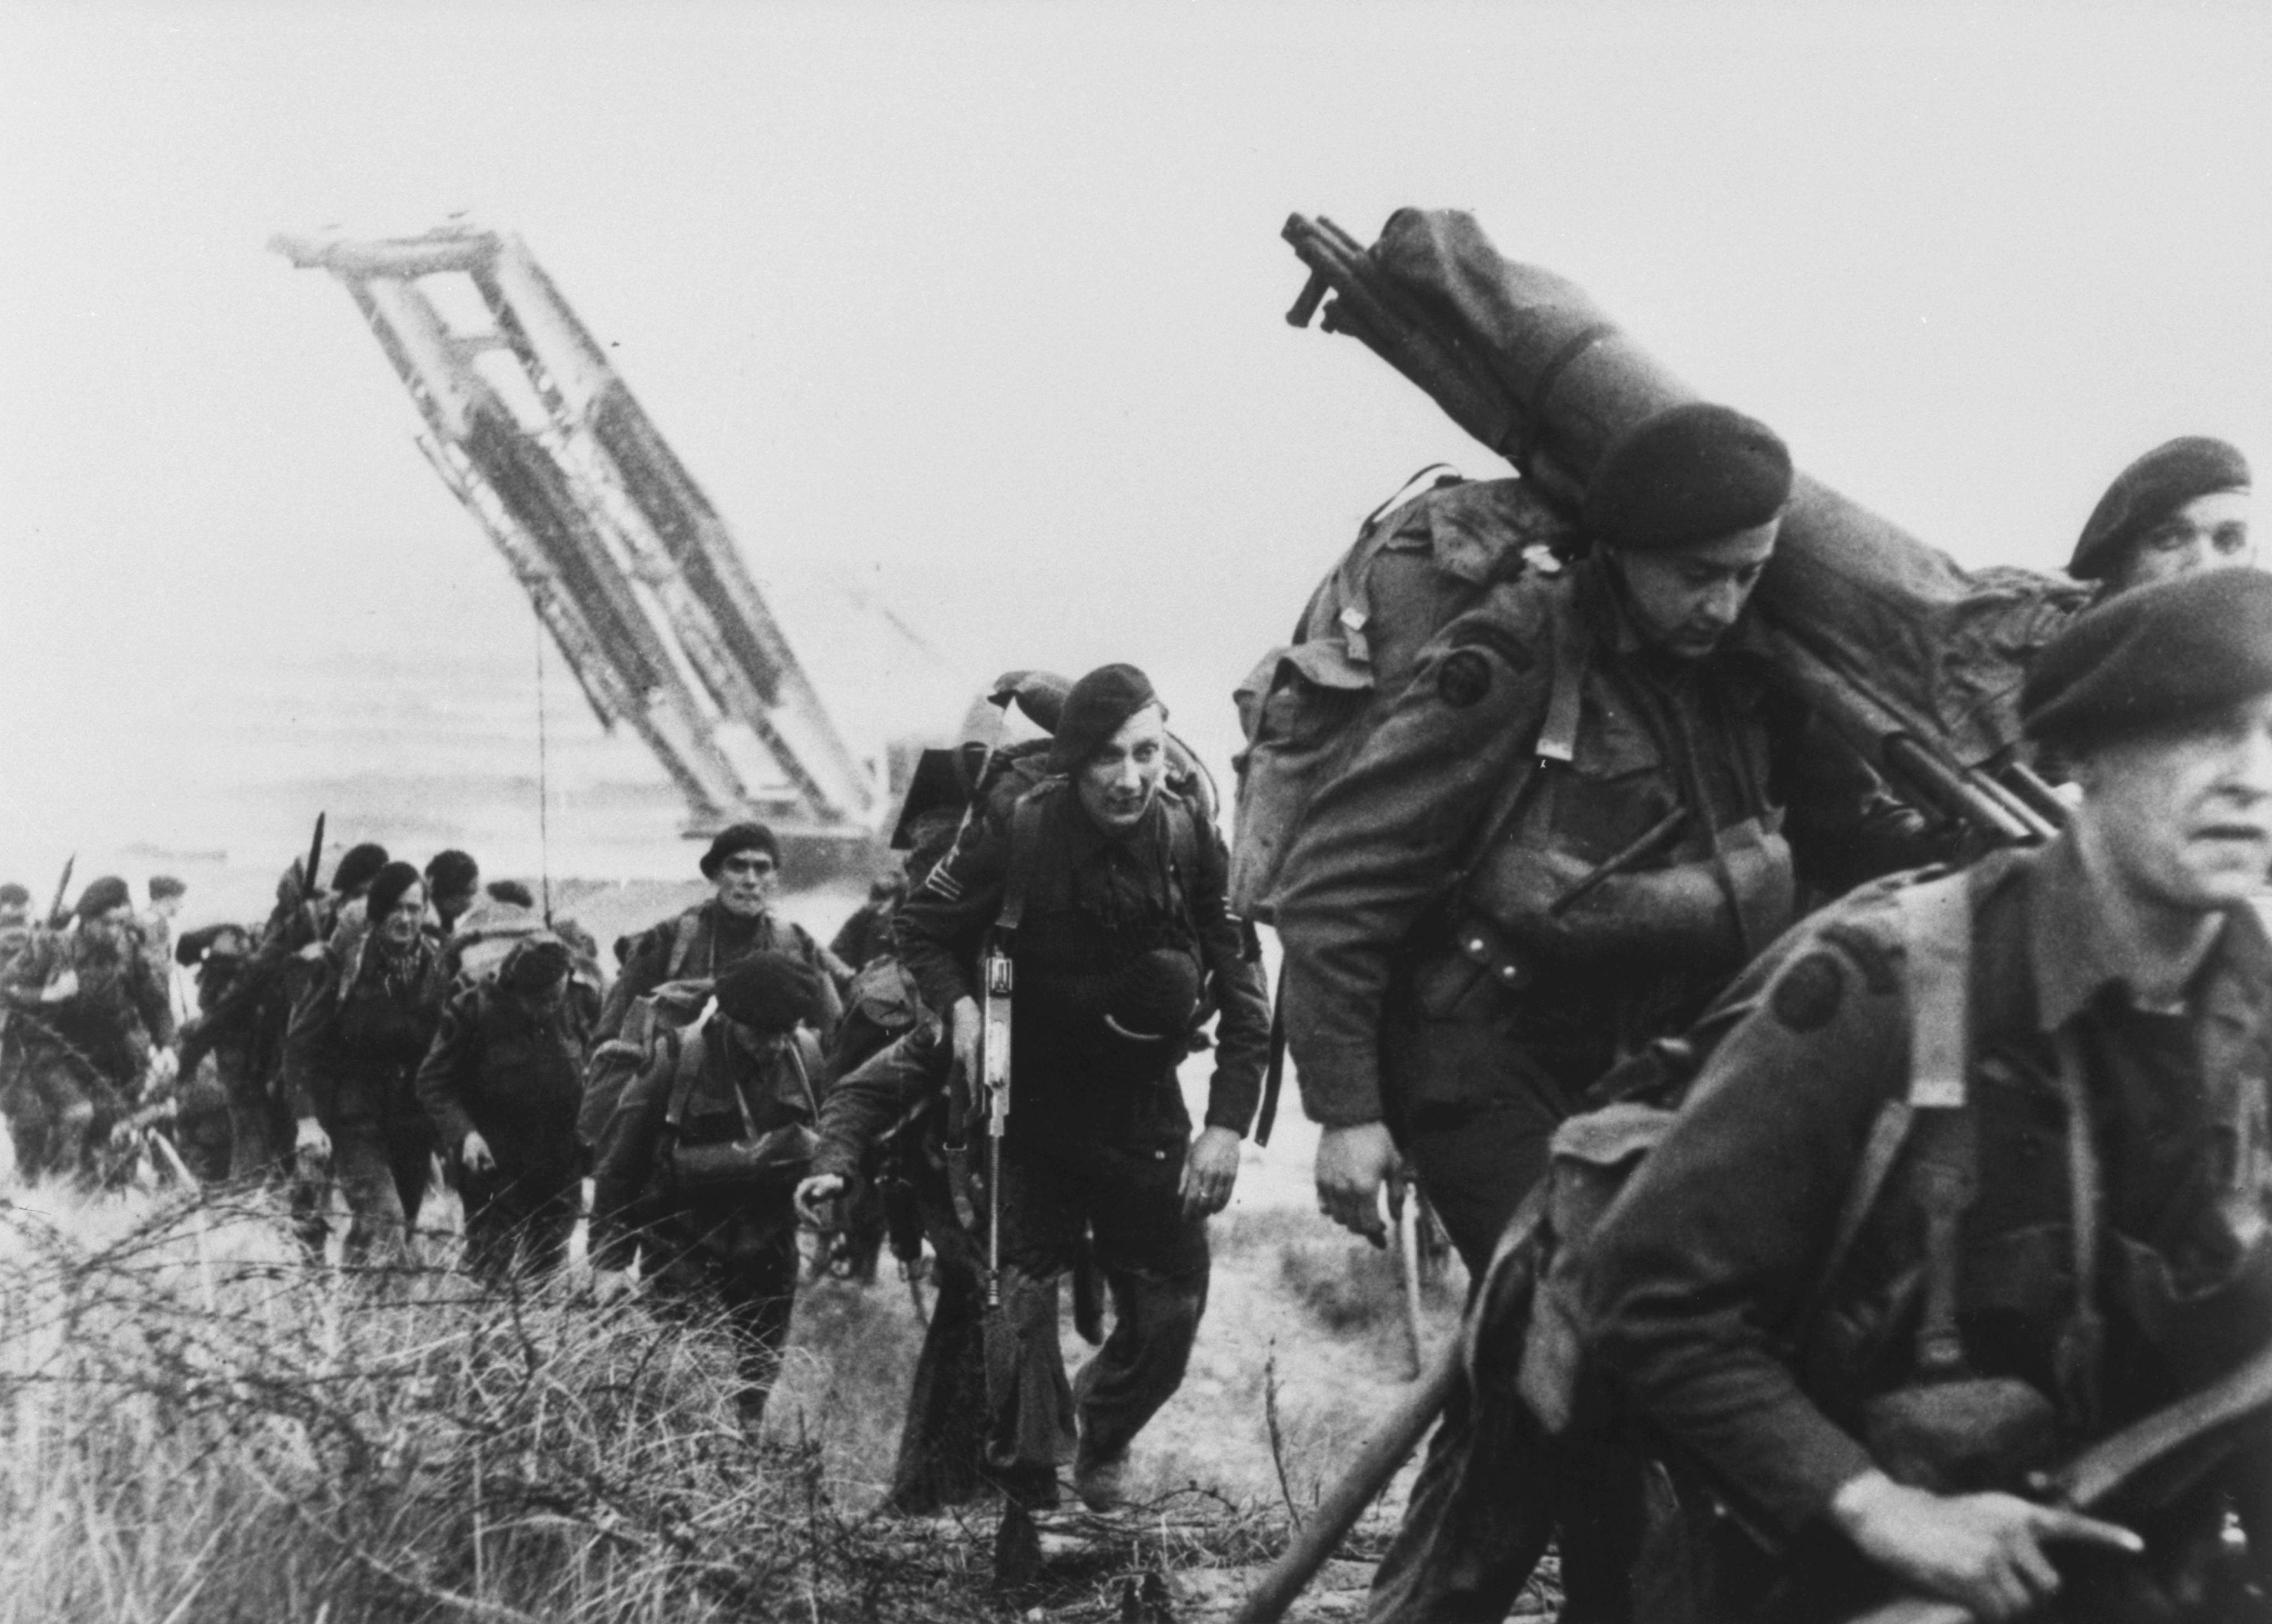 Royal Marine commandos moving off the Normandy Beaches during the advance inland from "Sword" beach.